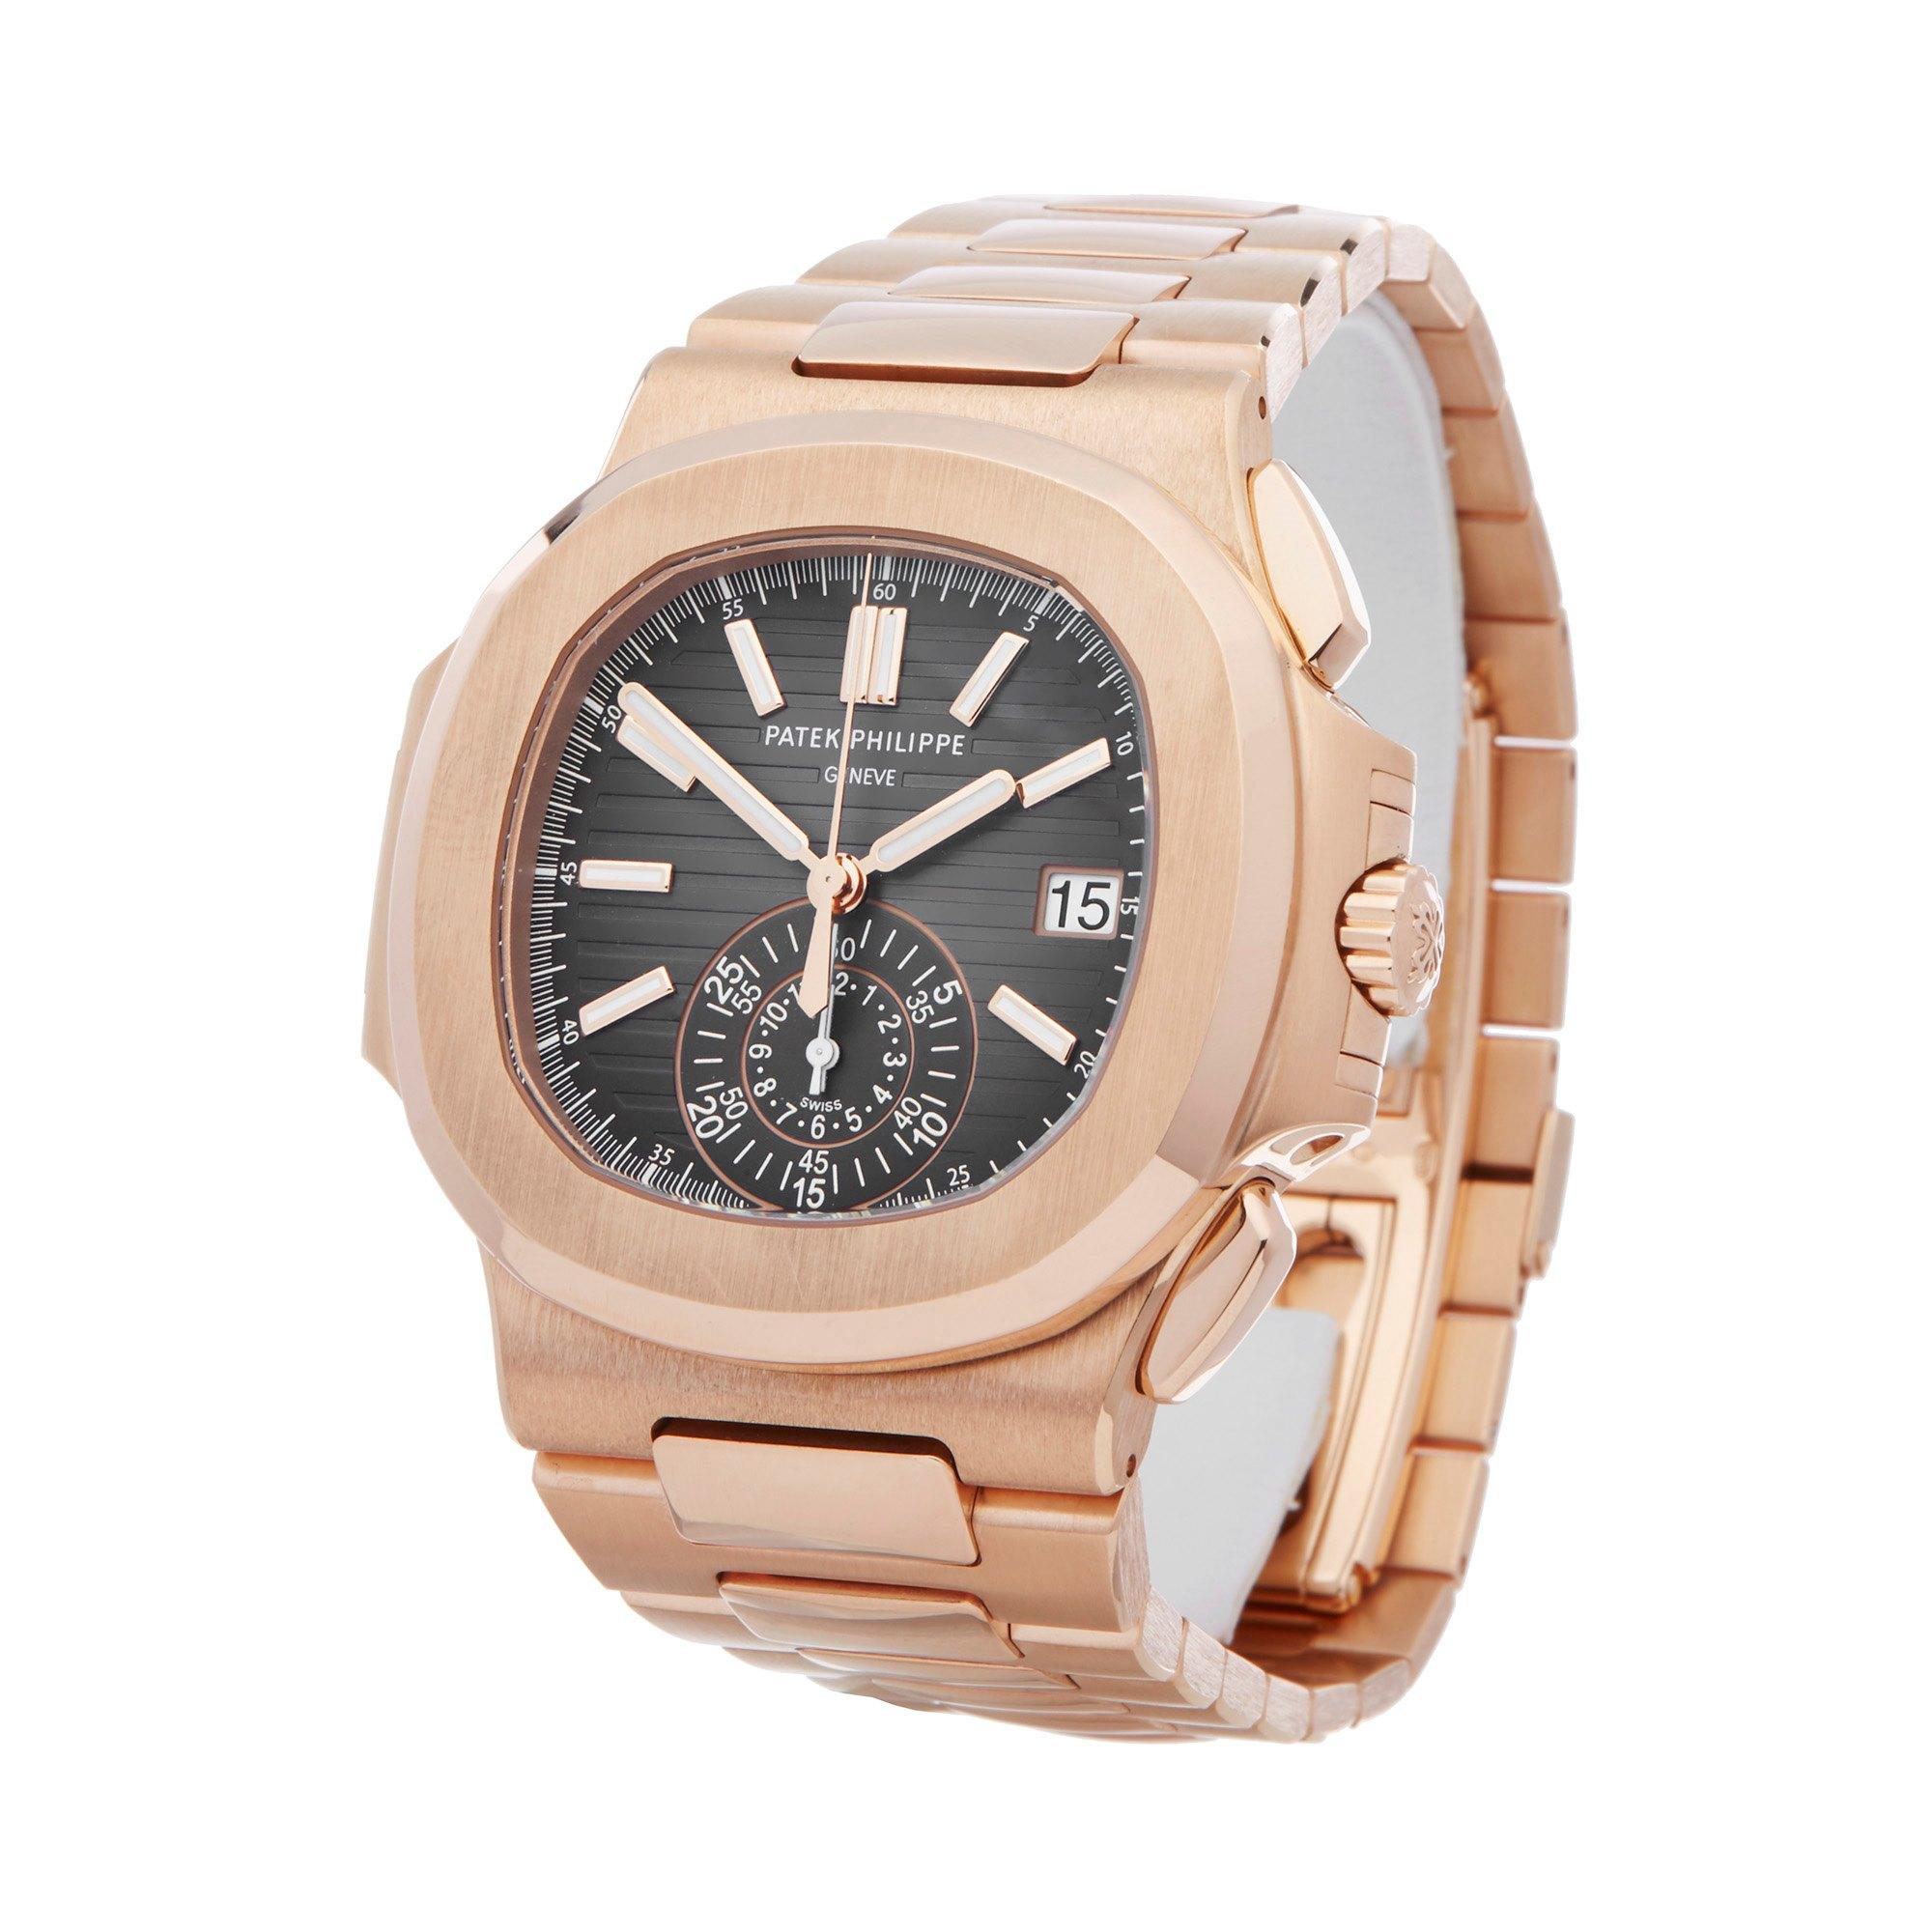 Xupes Reference: COM002638
Manufacturer: Patek Philippe
Model: Nautilus
Model Variant: 0
Model Number: 5980R/1R-001
Age: 26-08-2019
Gender: Men
Complete With: Patek Philippe Box, Manuals & Guarantee 
Dial: Grey Baton 
Glass: Sapphire Crystal
Case